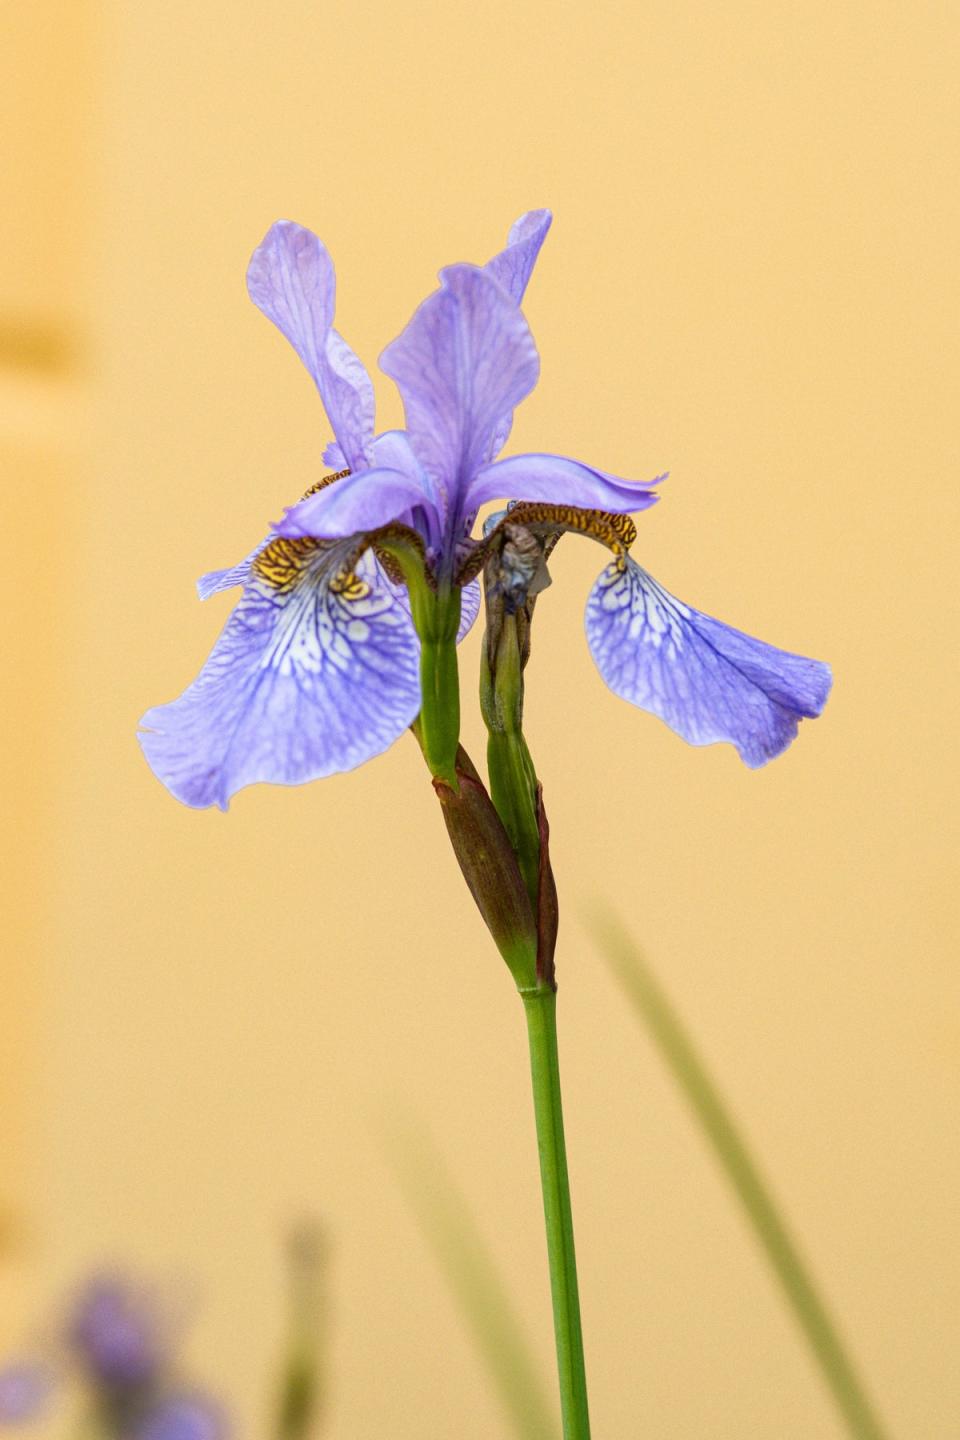 Irises are a winner for garden and vase this year, says Ann-Marie Powell (Siegfried Poepperl/Pexels)